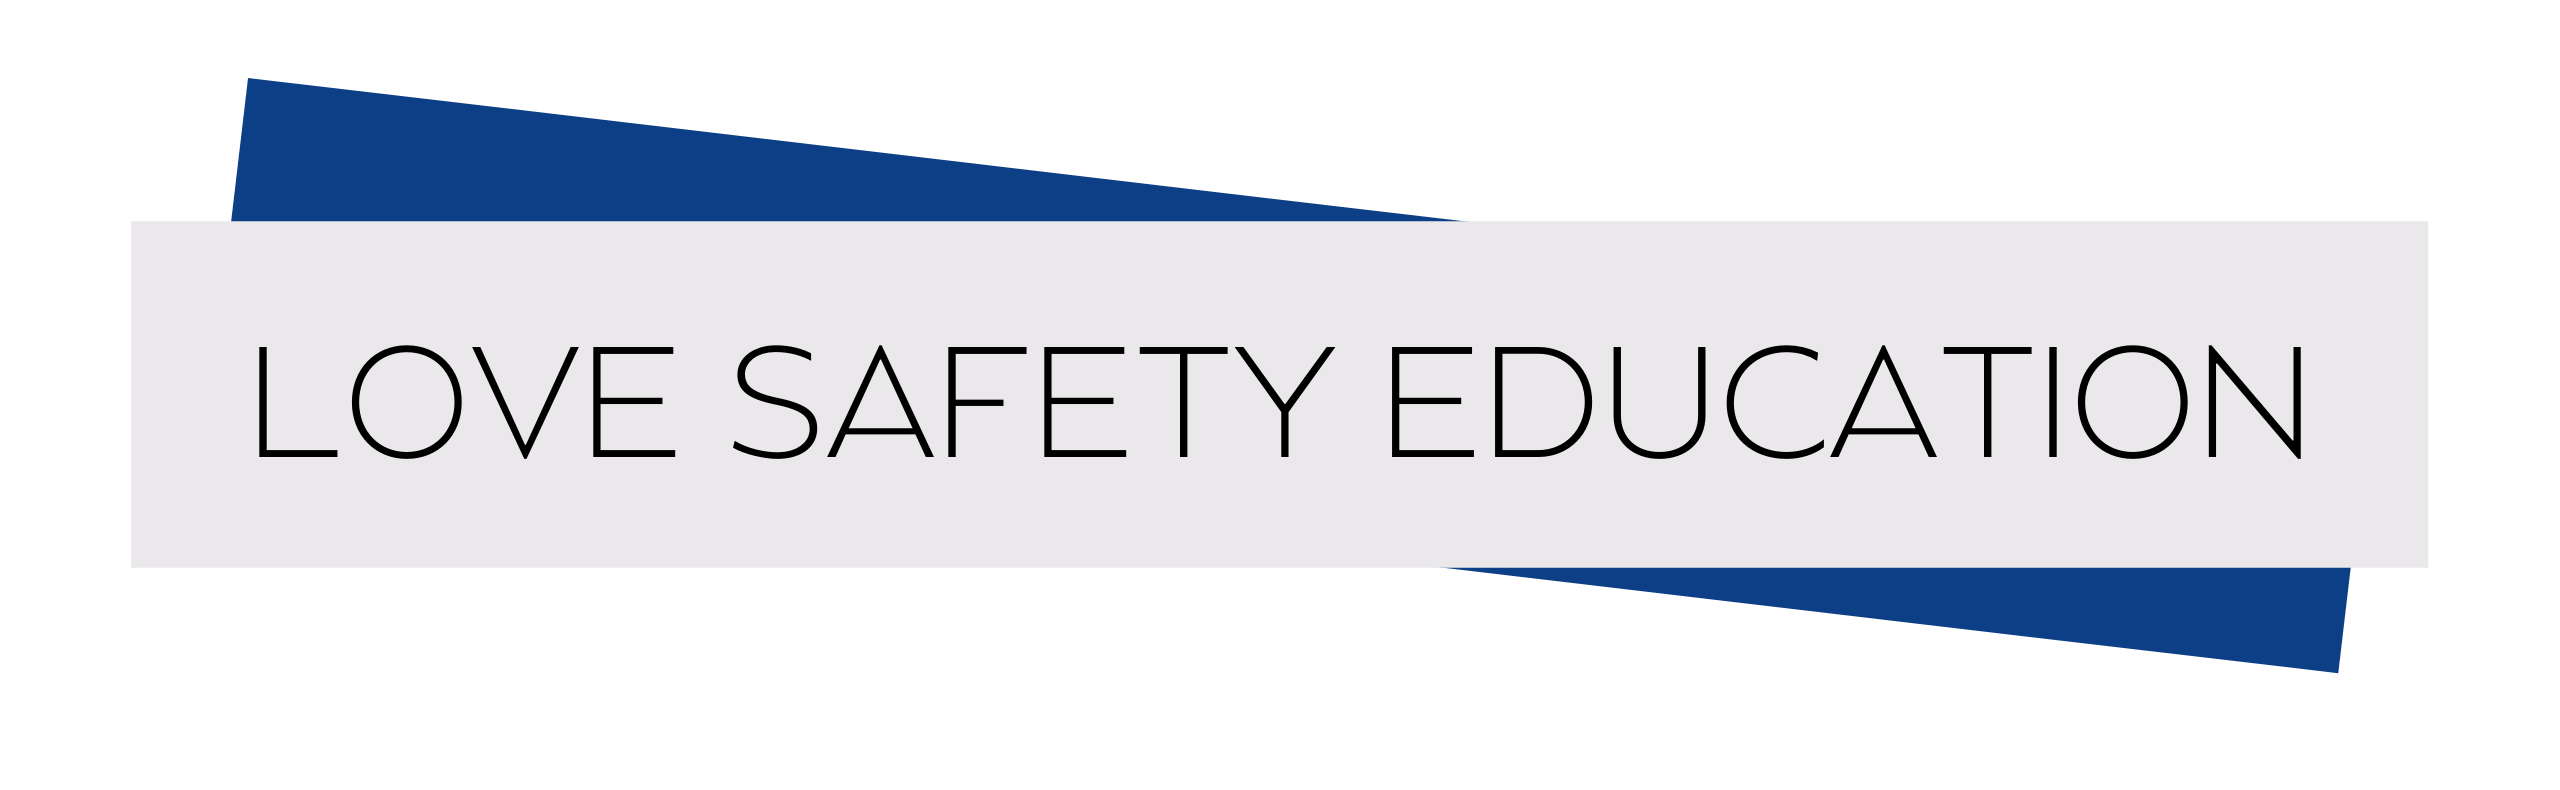 Love * Safety * Education